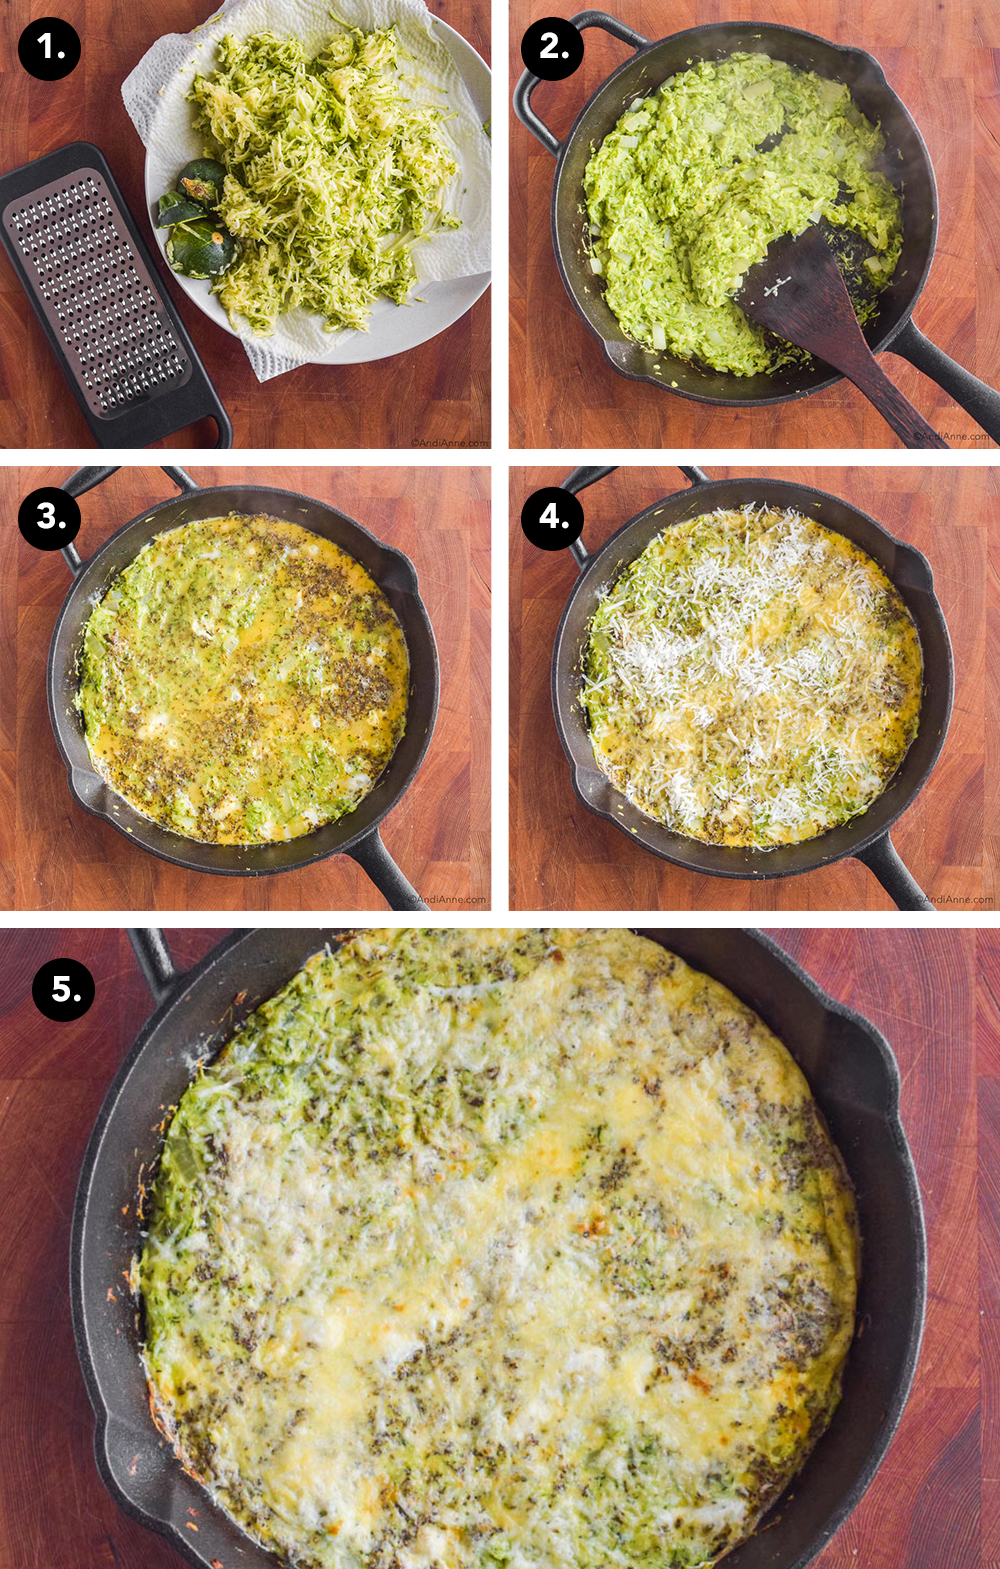 five images to make zucchini parmesan frittata. First a plate with grated zucchini and grater. Second with grated zucchini, onion and garlic in skillet, third - egg mixture poured over top of zucchini in skillet. Fourth - grated parmesan sprinkled overtop. Fifth - cooked zucchini parmesan frittata.